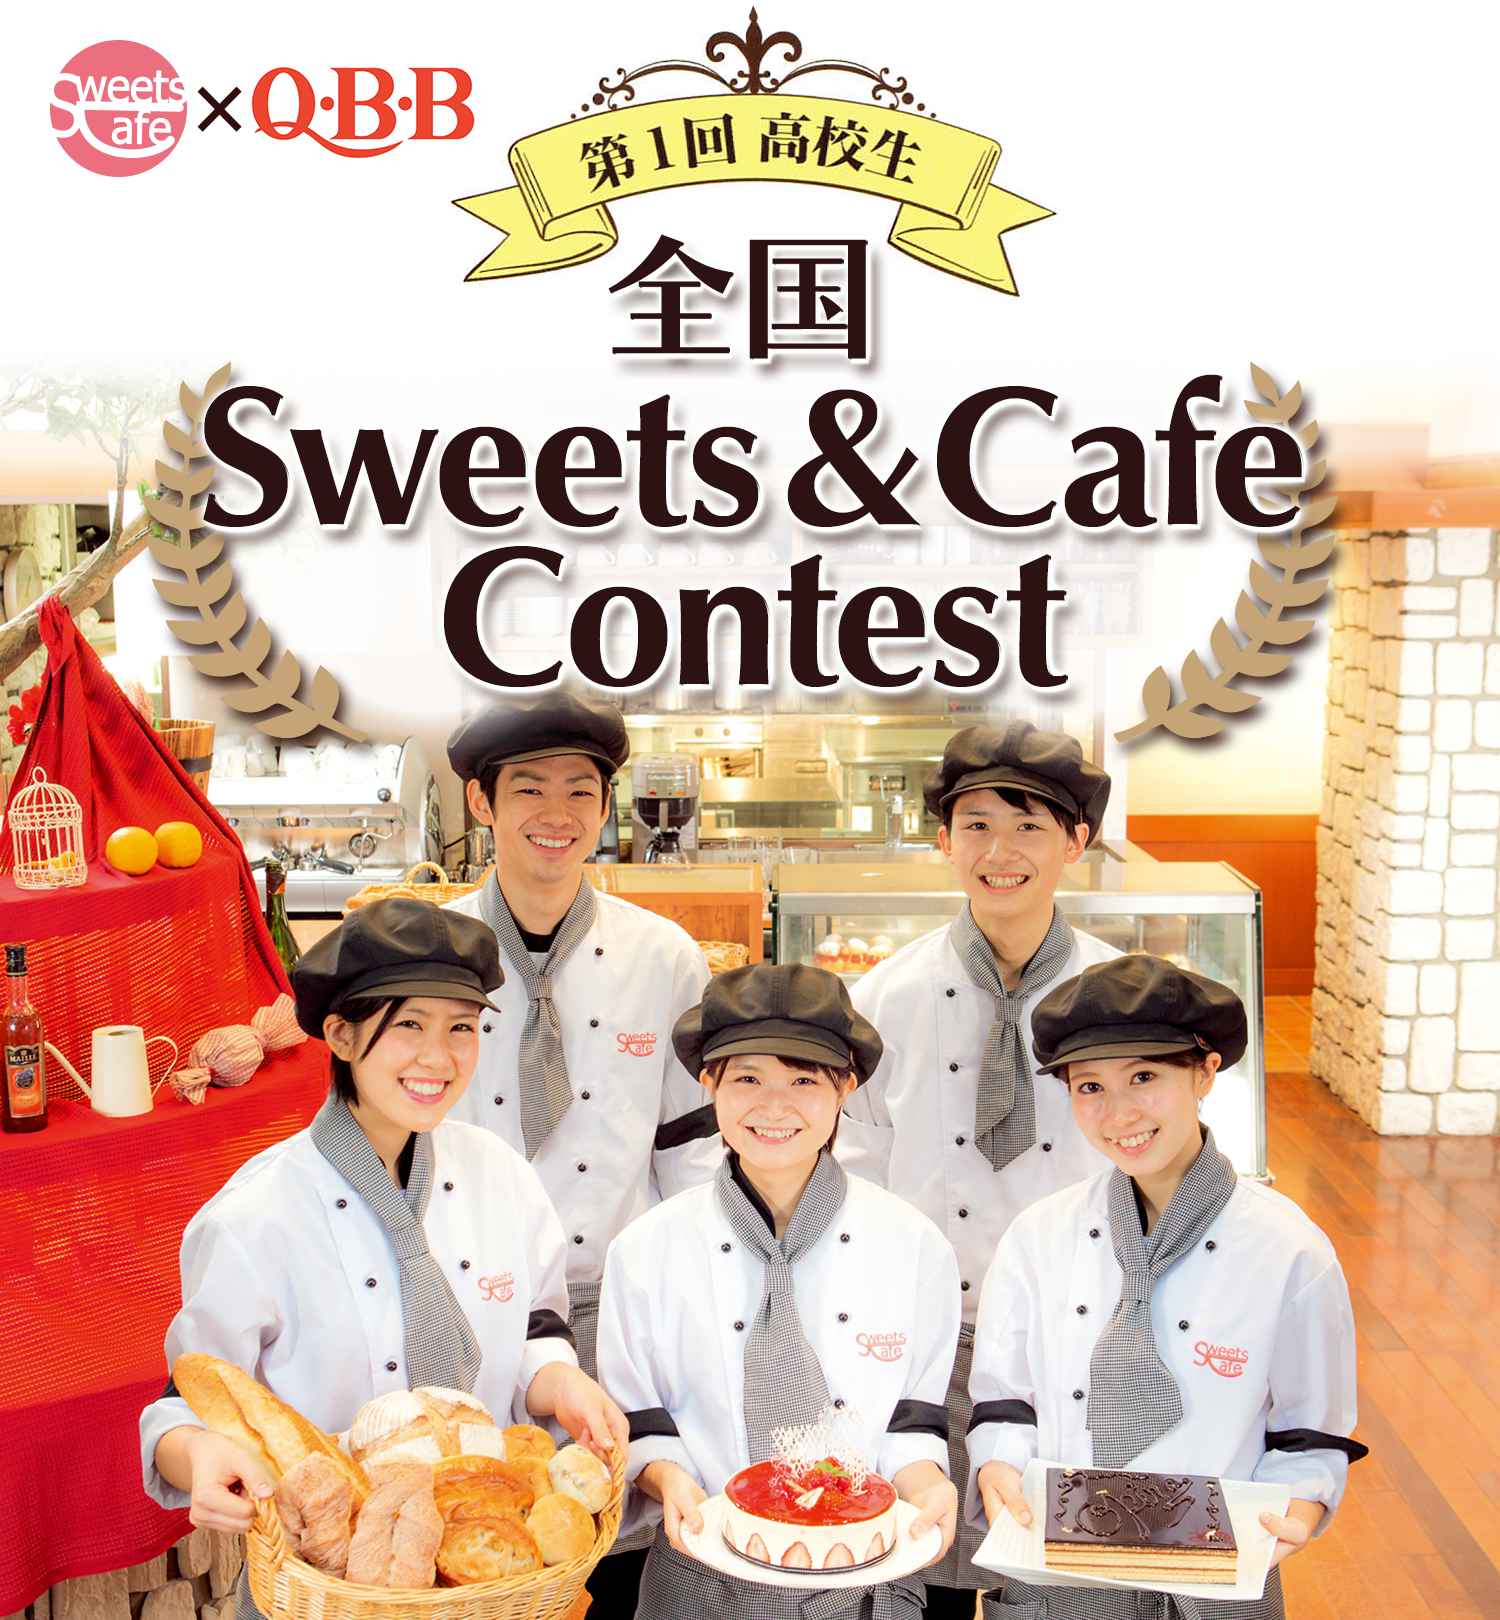 Sweets Cafe × QBB第一回 高校生 全国Sweets & Cafe Contest